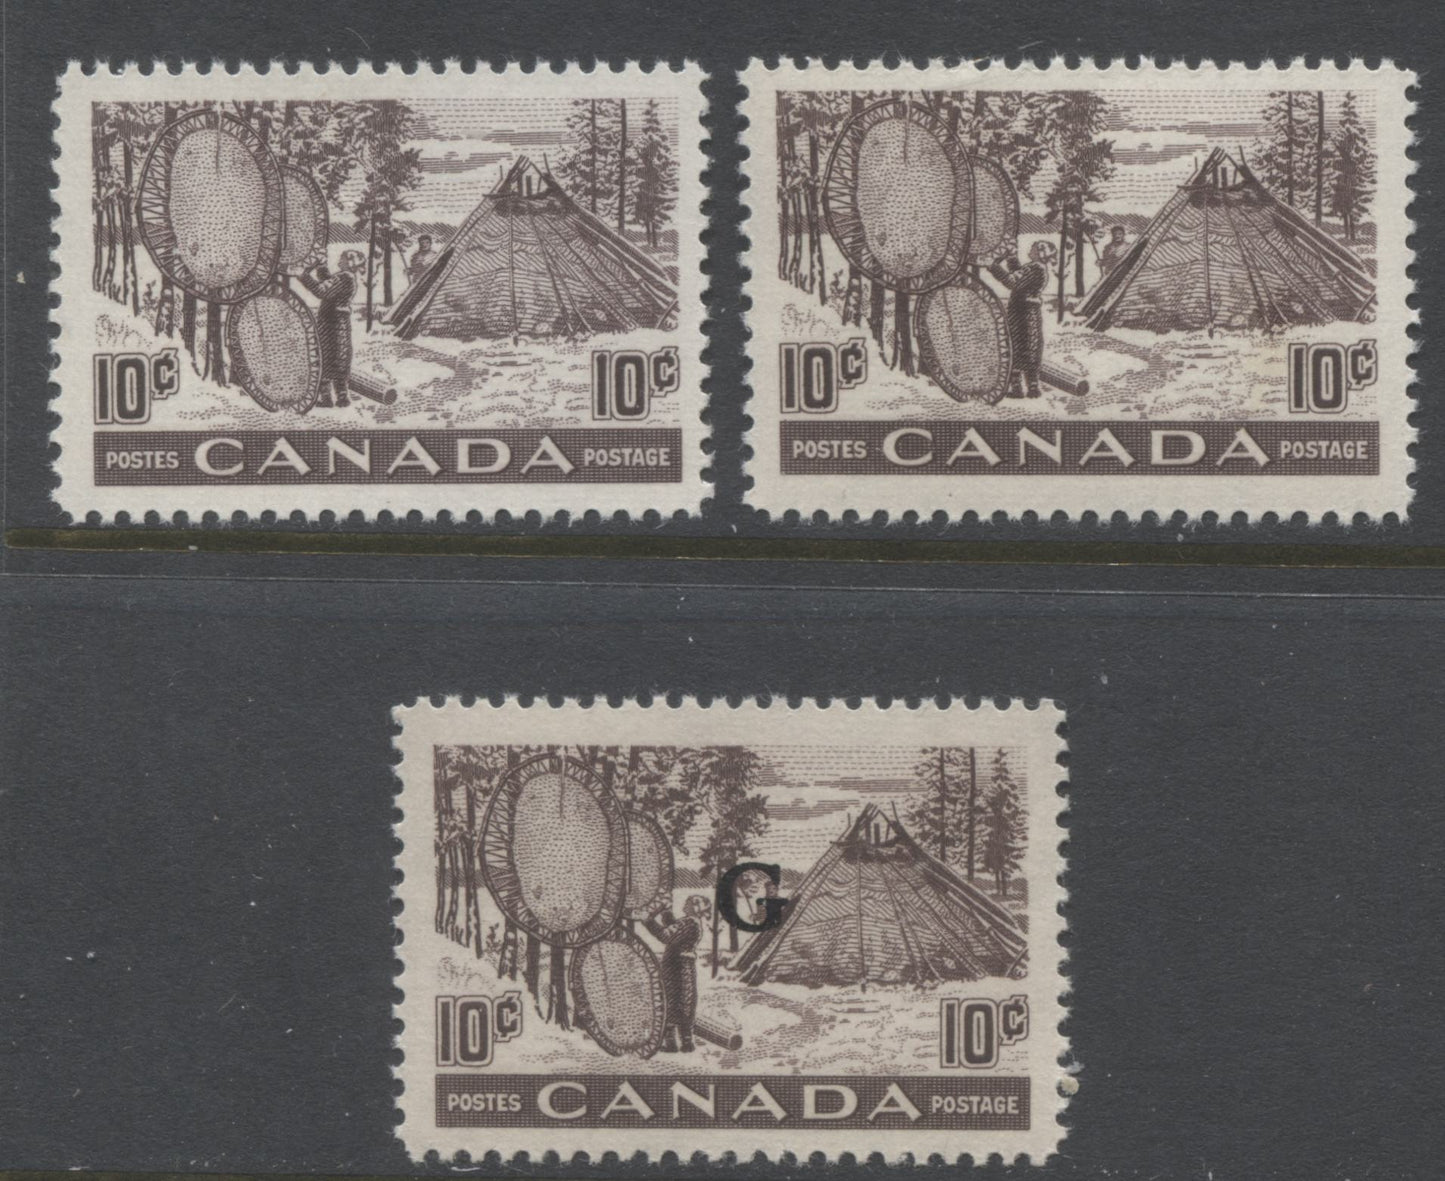 Lot 202 Canada #301,O26 10c Deep Violet Brown Drying Skins, 1950-1955 Natural Resources Definitives, 3 VFNH Singles, Smooth Paper, Yellowish Cream Gum